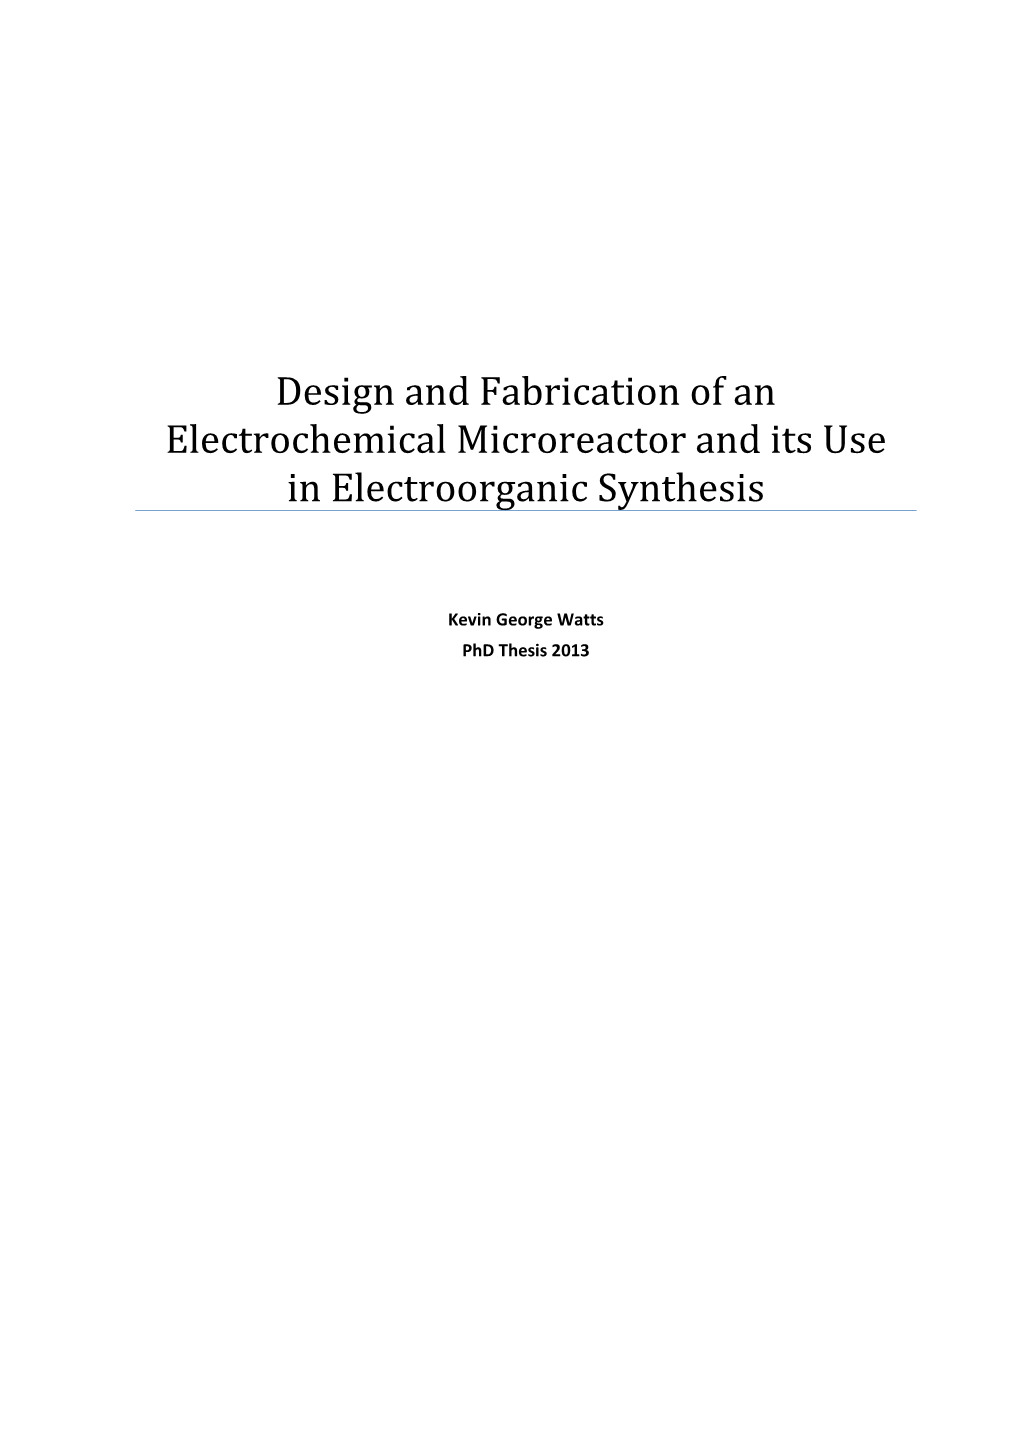 Design and Fabrication of an Electrochemical Microreactor and Its Use in Electroorganic Synthesis